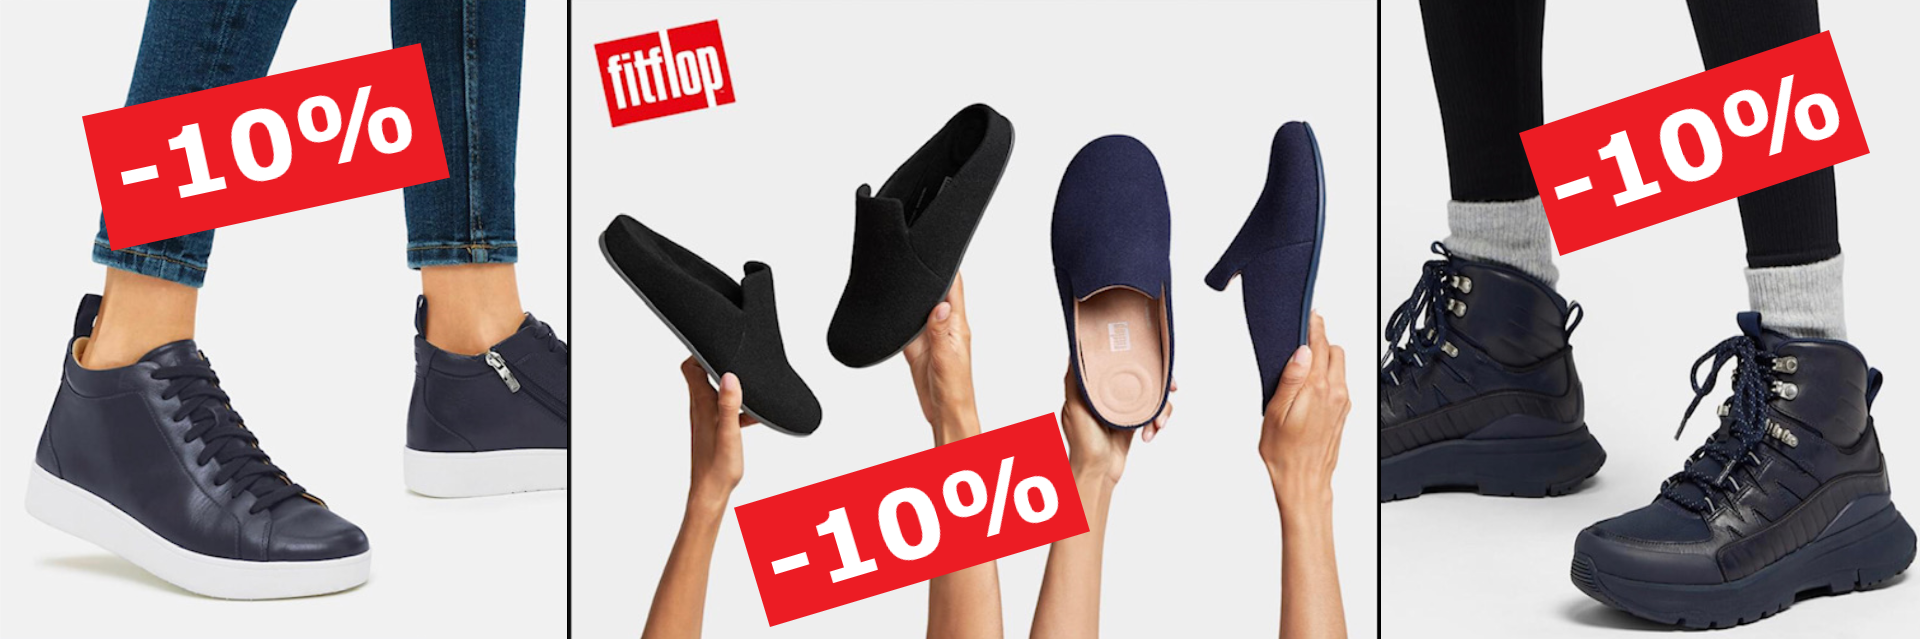 Fitflop12 2022